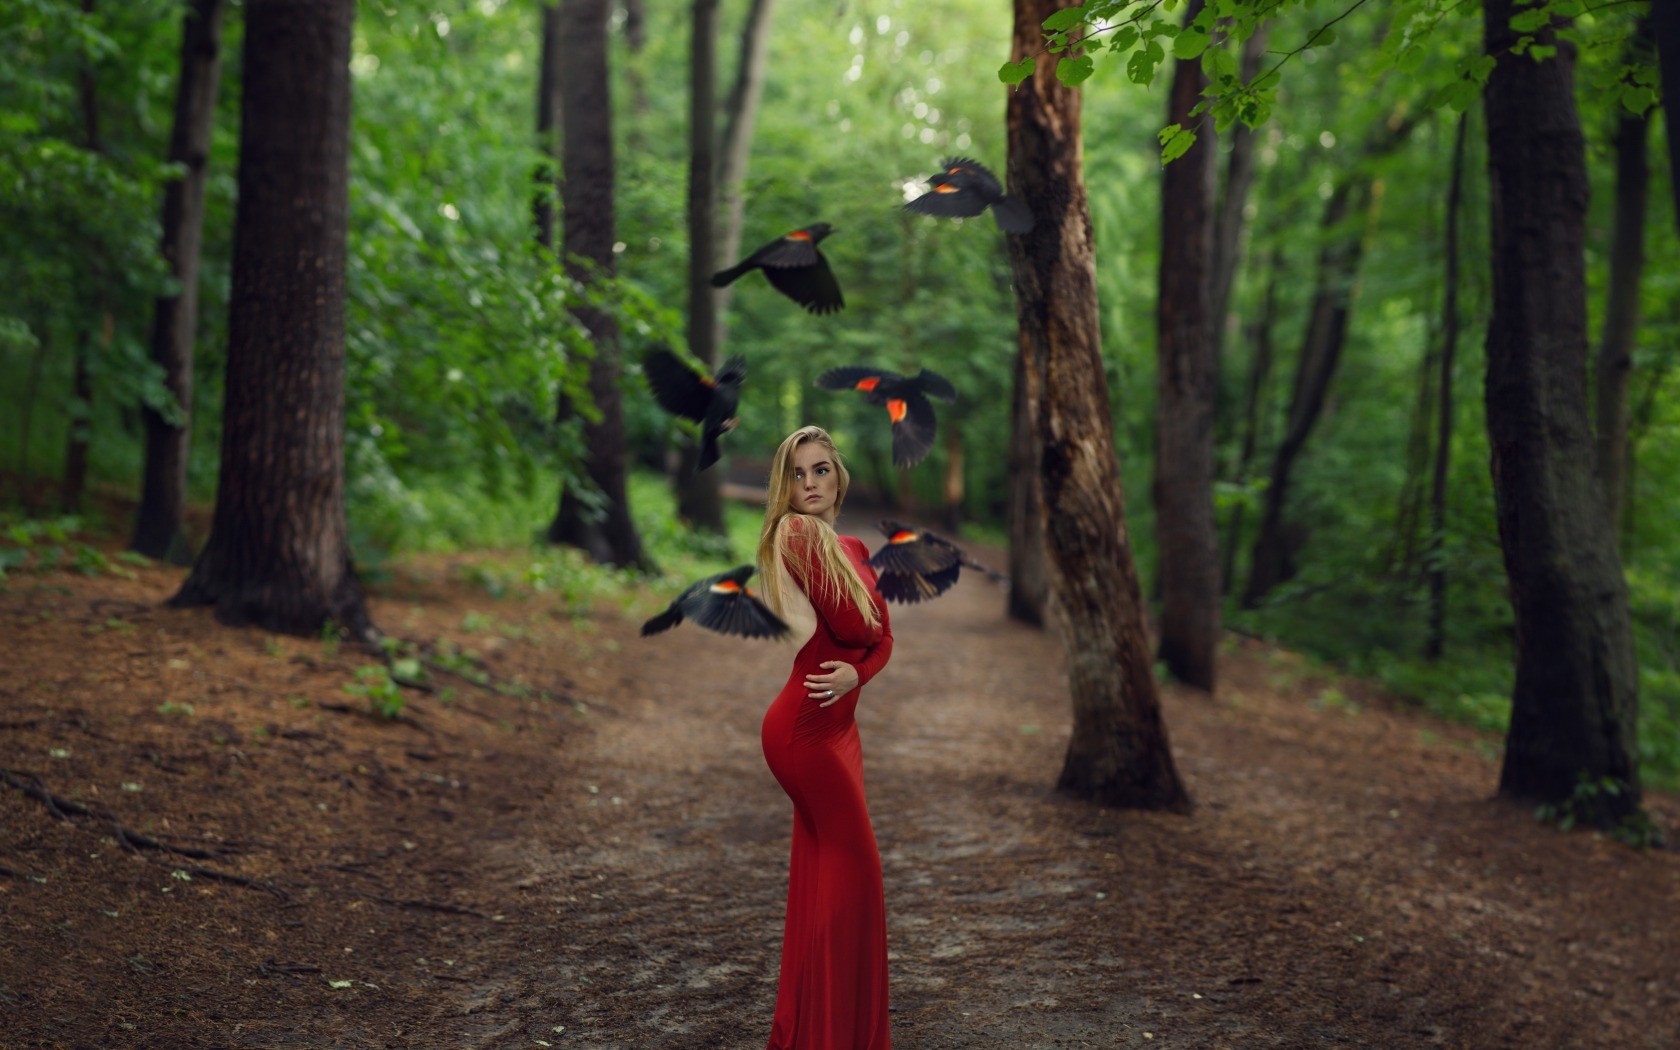 People 1680x1050 women women outdoors blonde depth of field red dress long hair birds forest nature animals red clothing looking away trees standing model outdoors